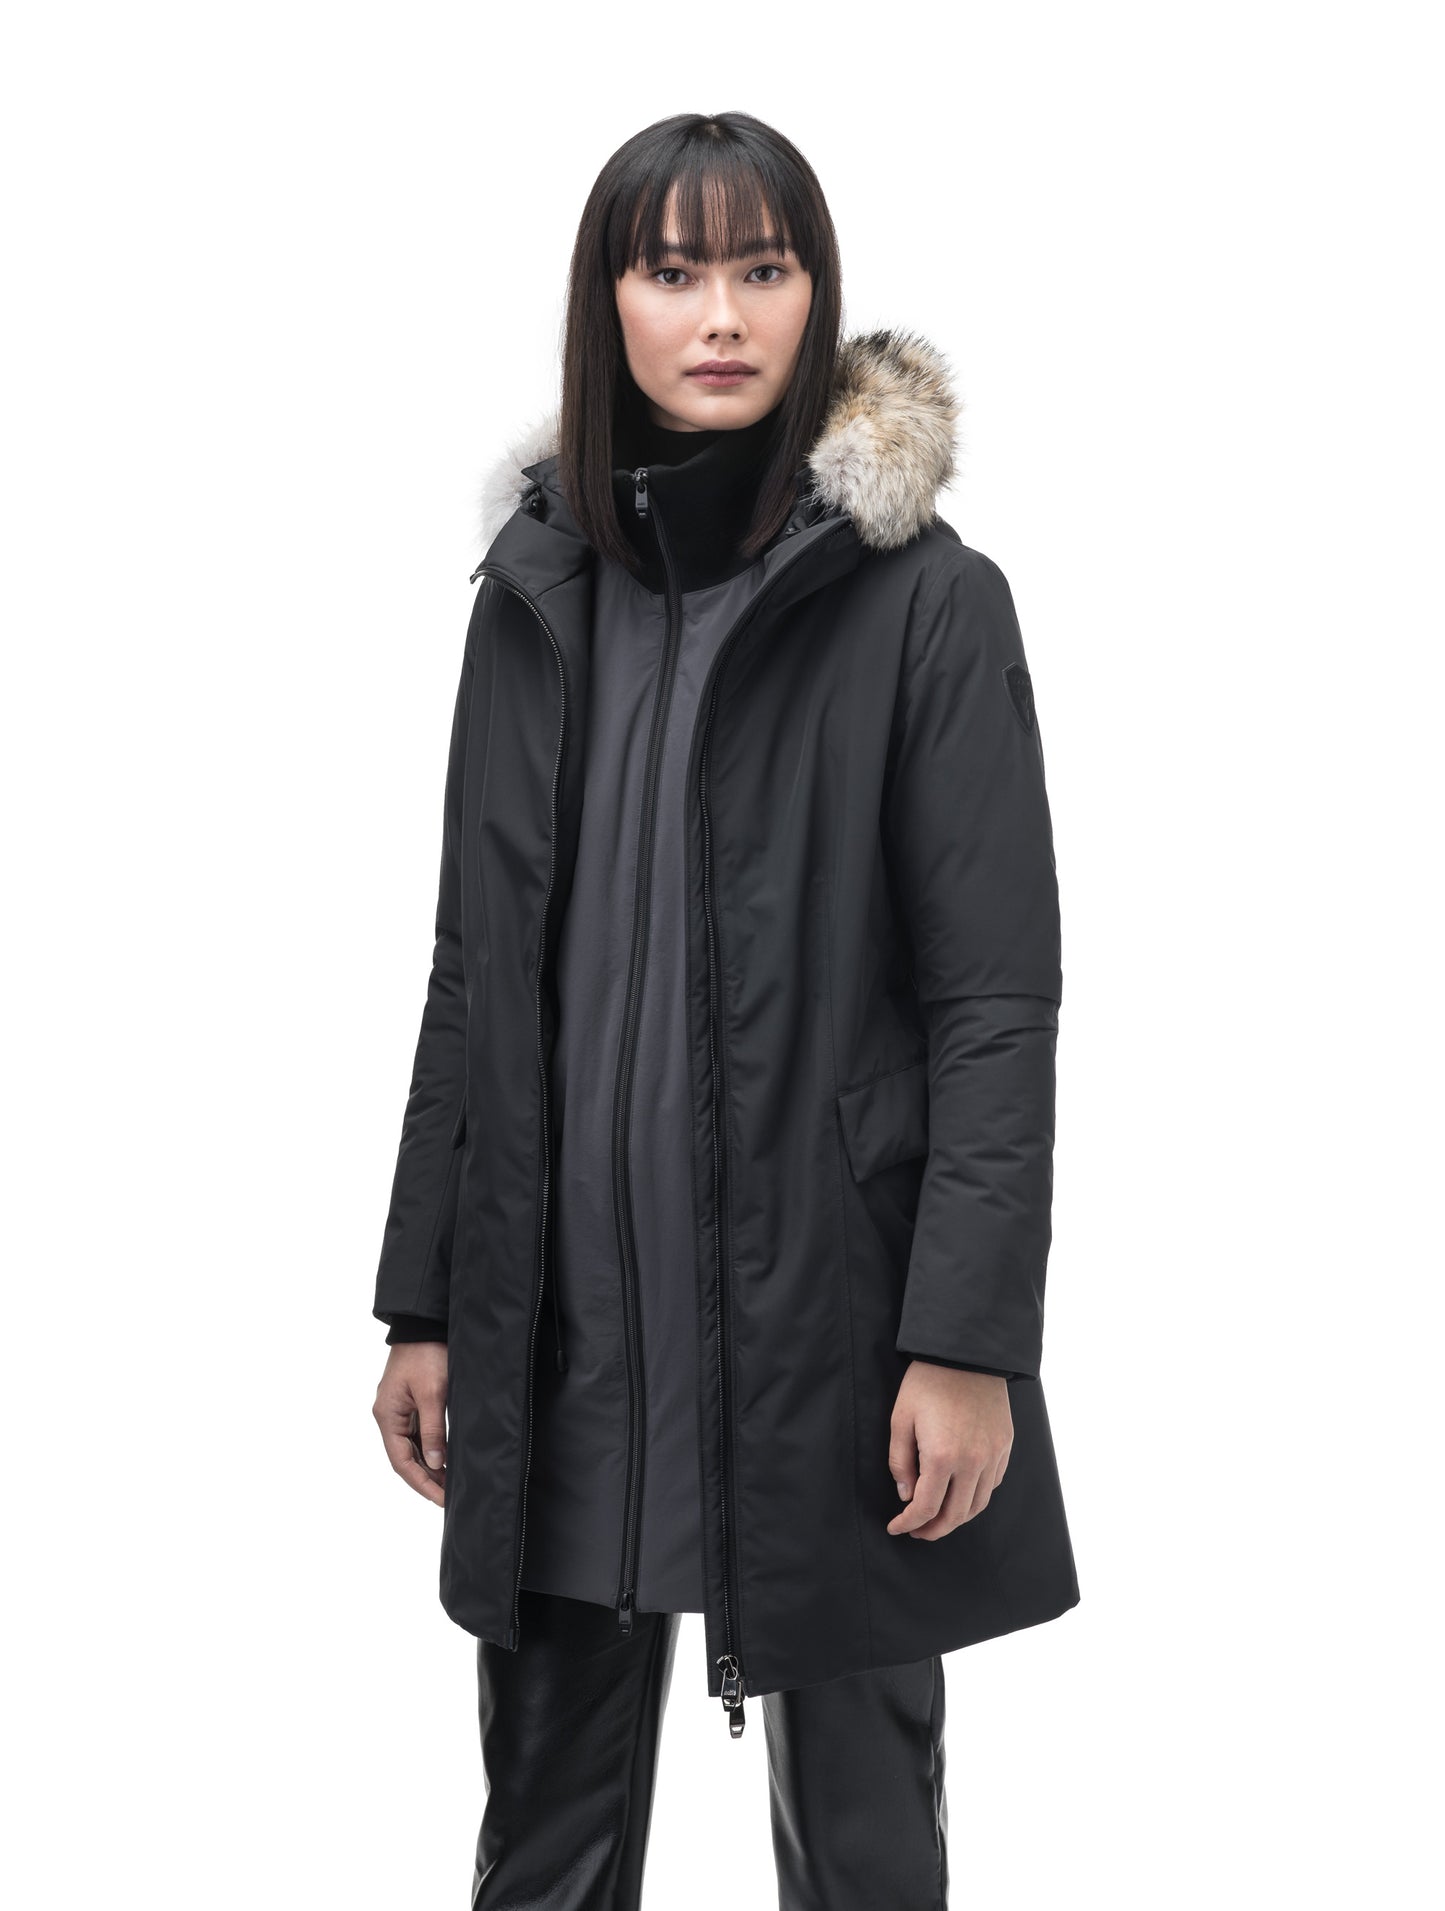 Romeda Ladies Mid Thigh Parka in thigh length, Canadian duck down insulation, non-removable hood with removable fur ruff trim, and two-way front zipper, in Black